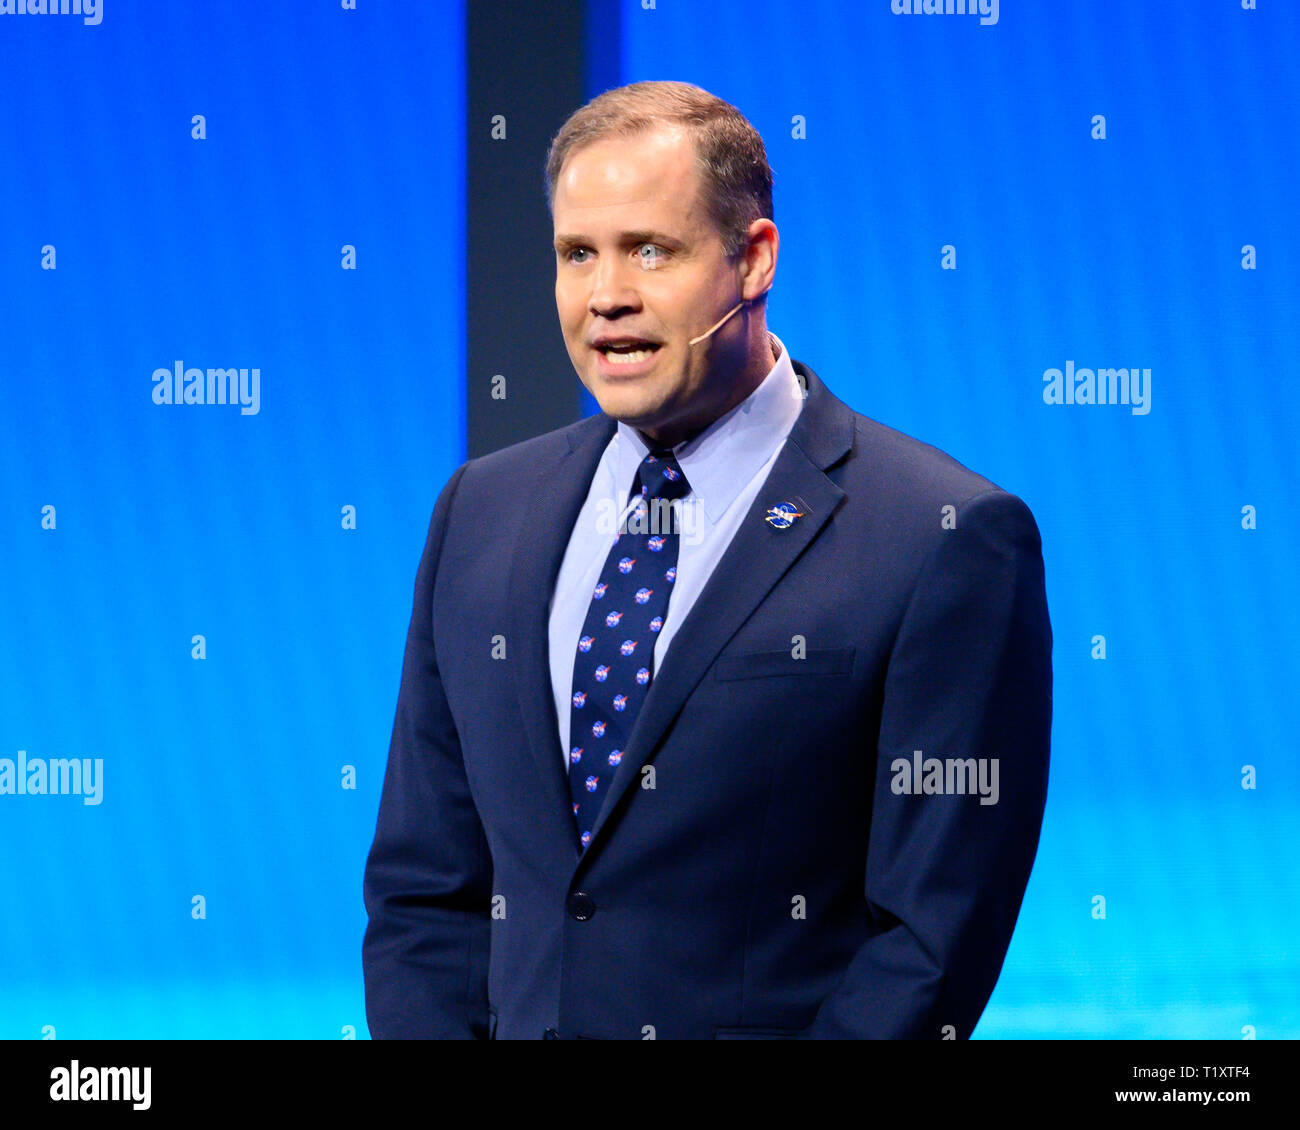 Jim Bridenstine, Administrator of the National Aeronautics and Space Administration (NASA) seen speaking during the American Israel Public Affairs Committee (AIPAC) Policy Conference in Washington, DC. Stock Photo